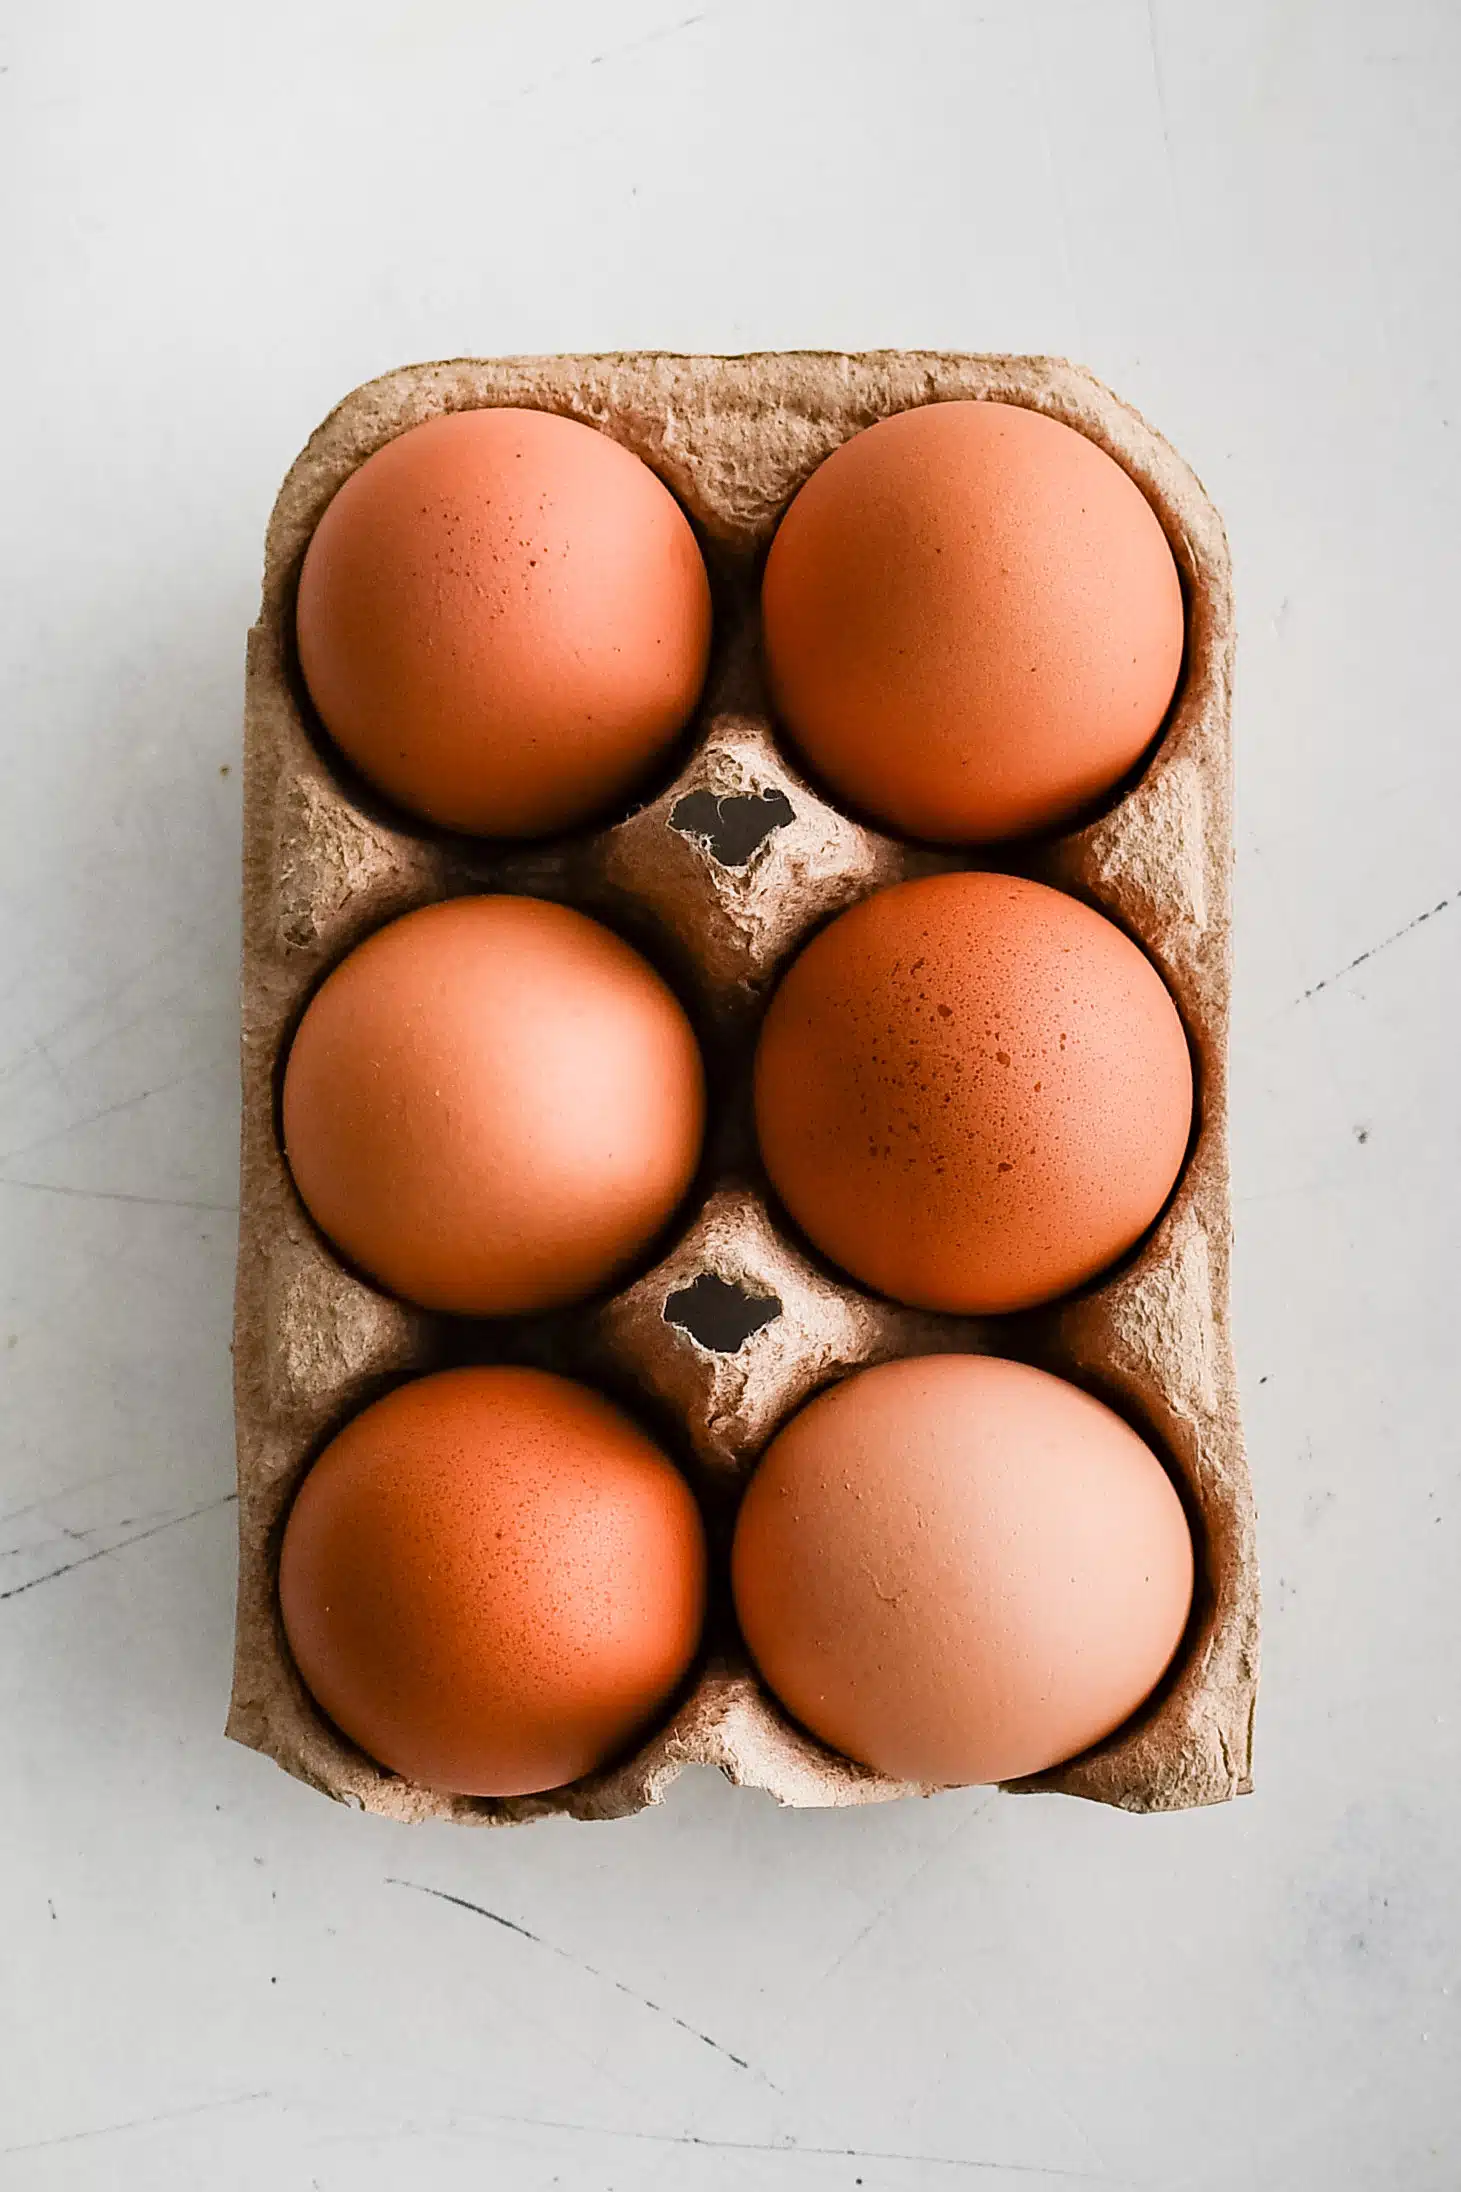 Egg carton filled with six brown eggs.